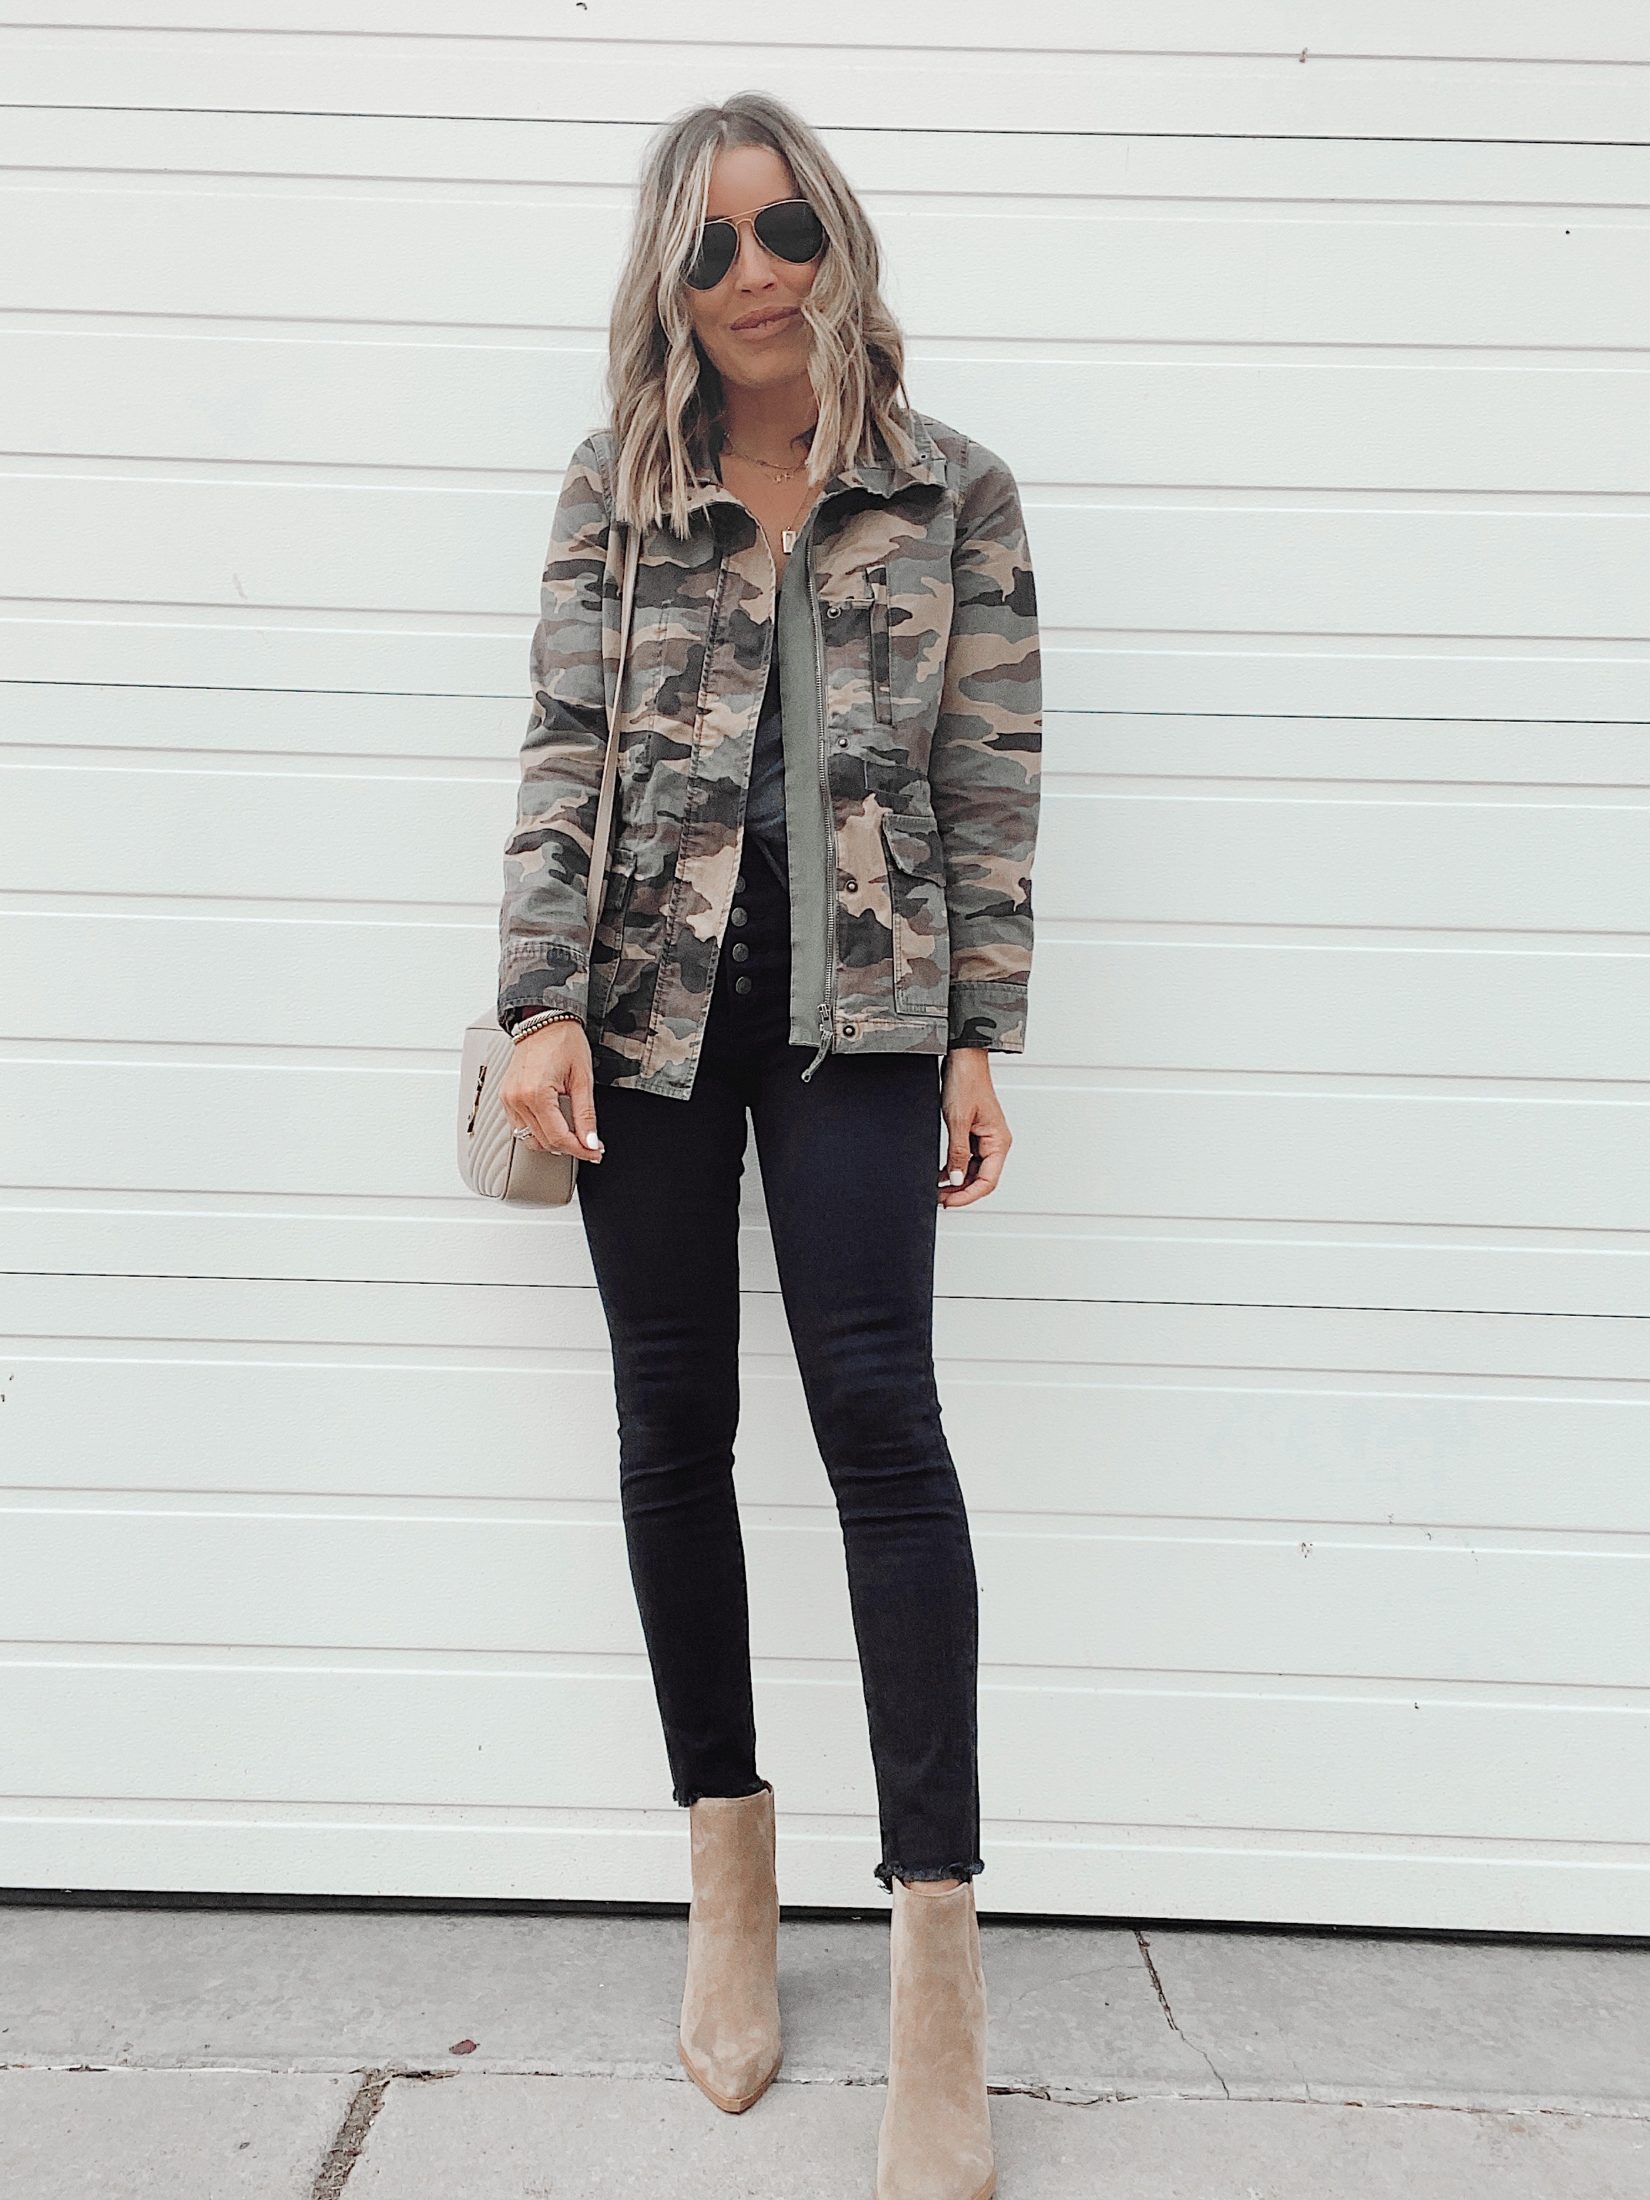 jaime shrayber styling madewell camo jacket with black jeans for fall 2020